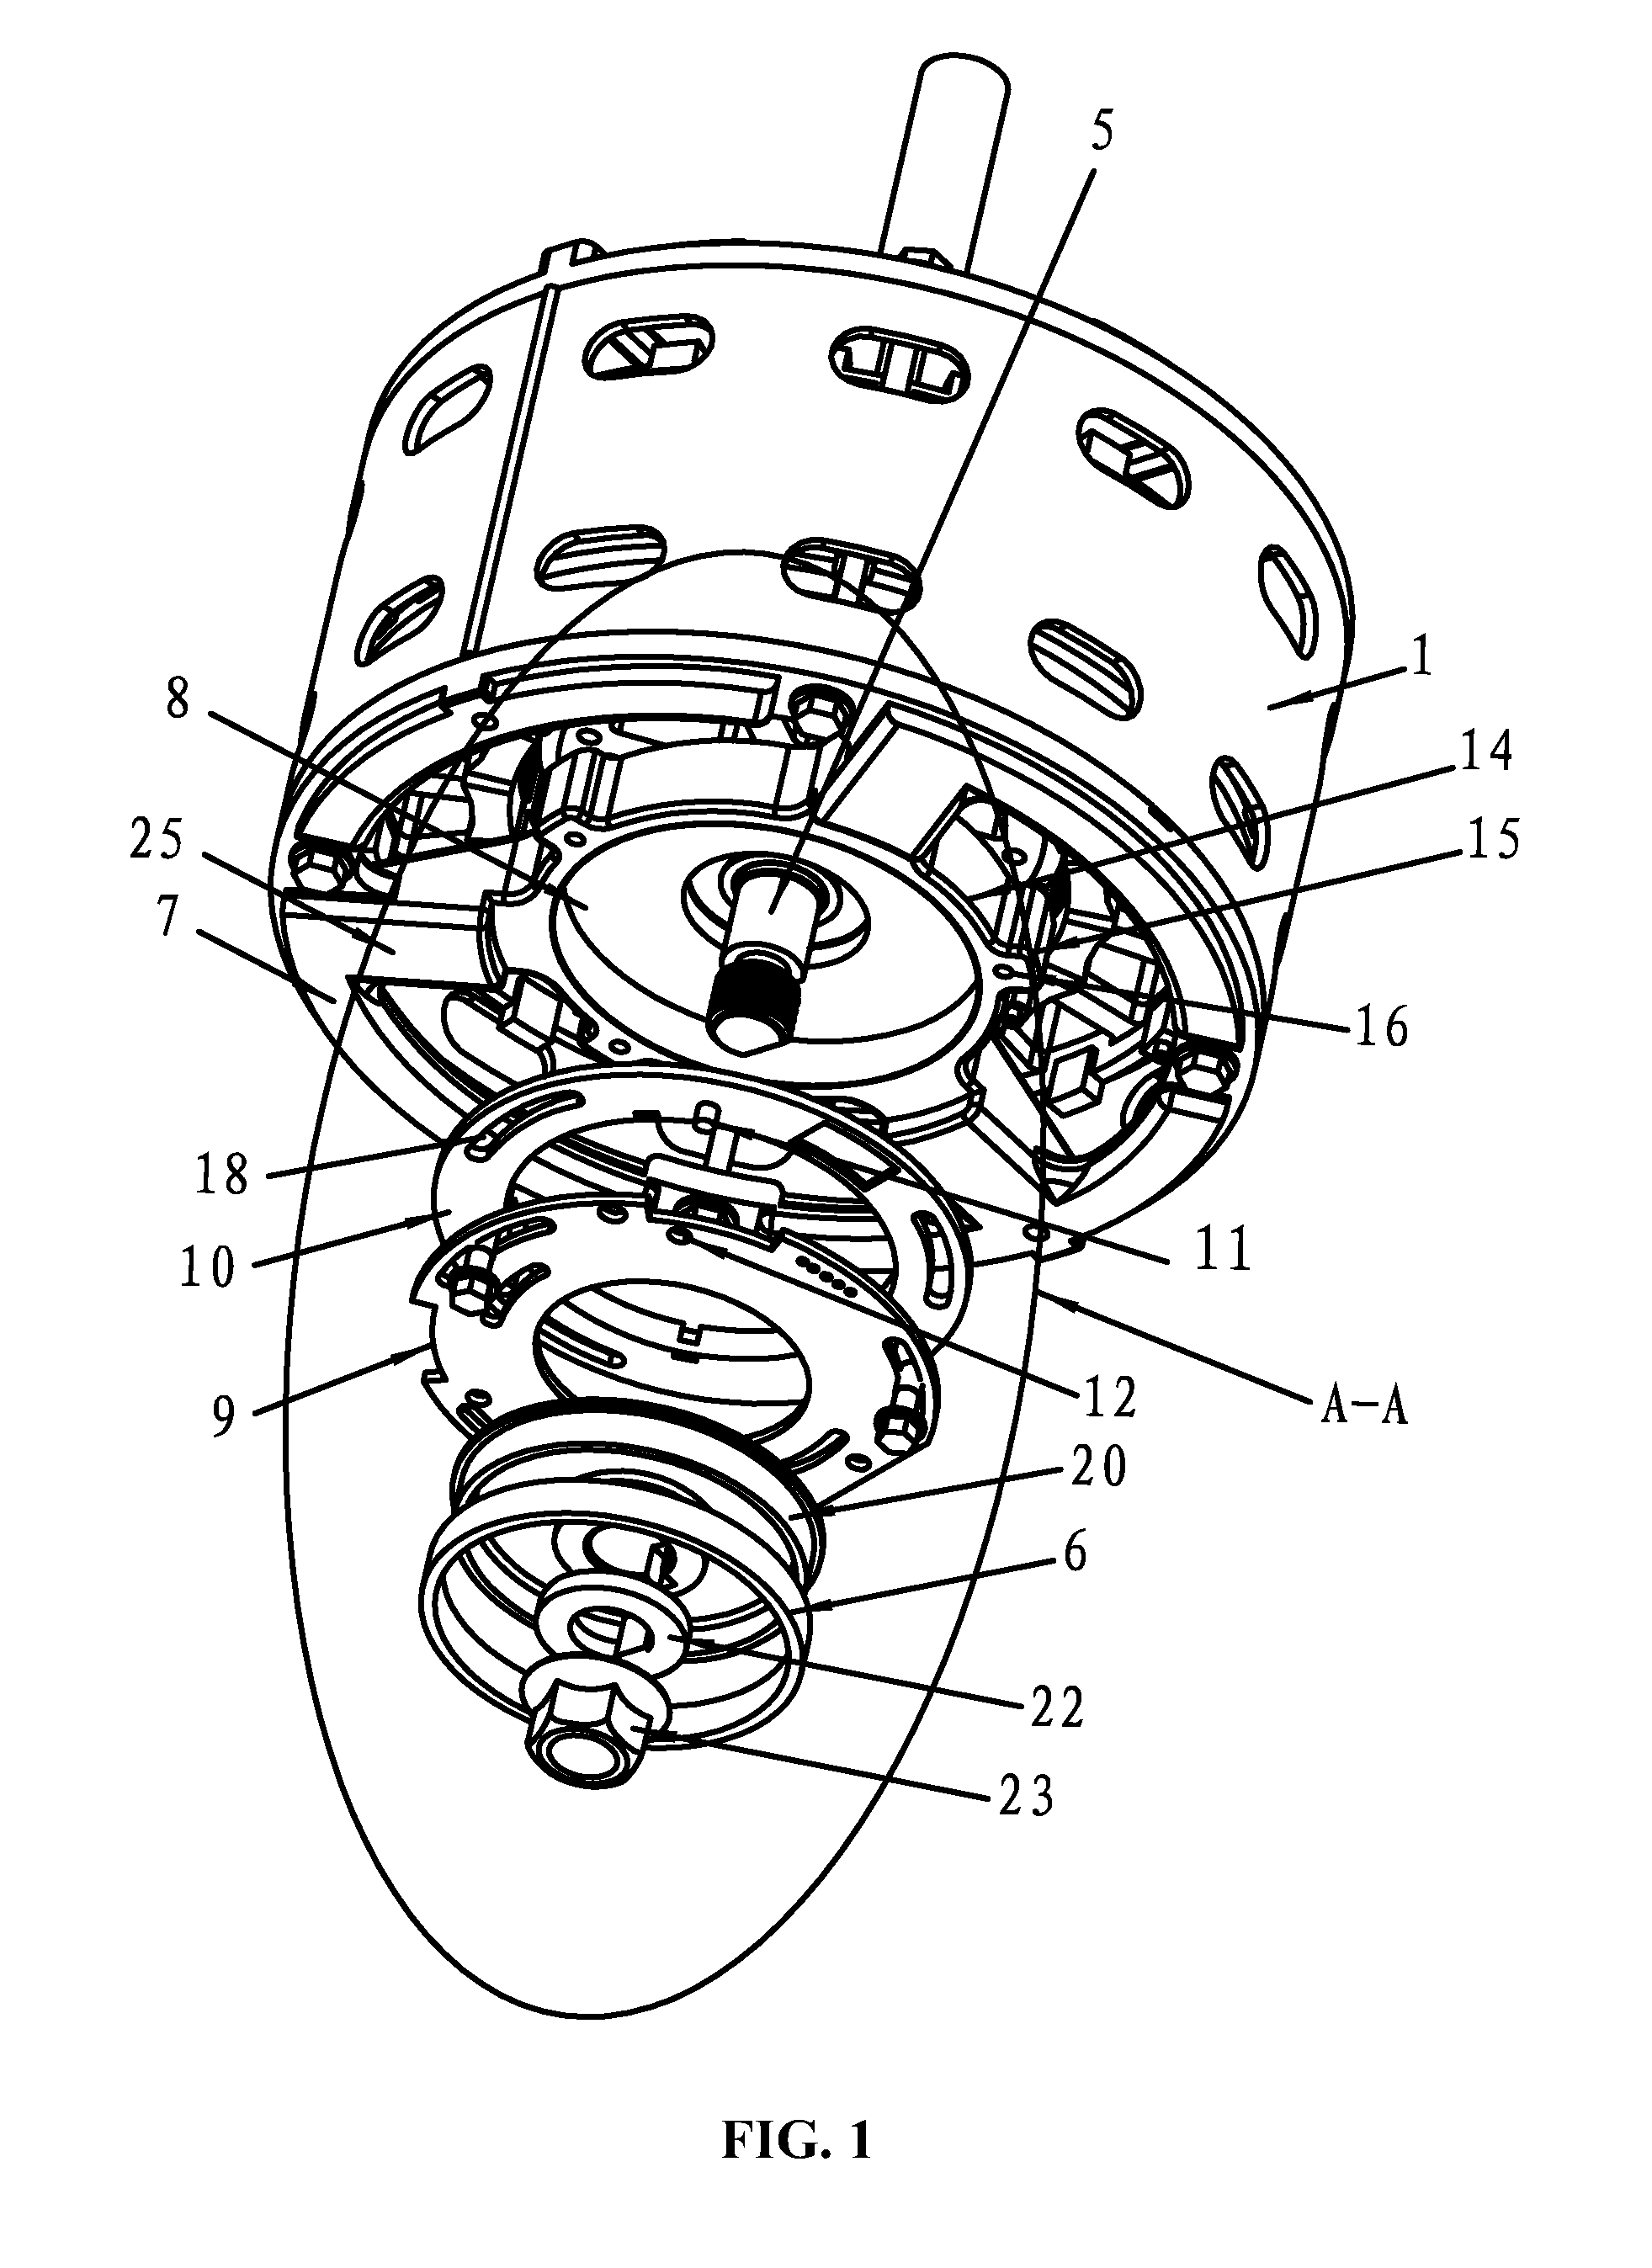 Brushless DC motor having structures for mounting a hall element and a magnetic ring outside a motor casing